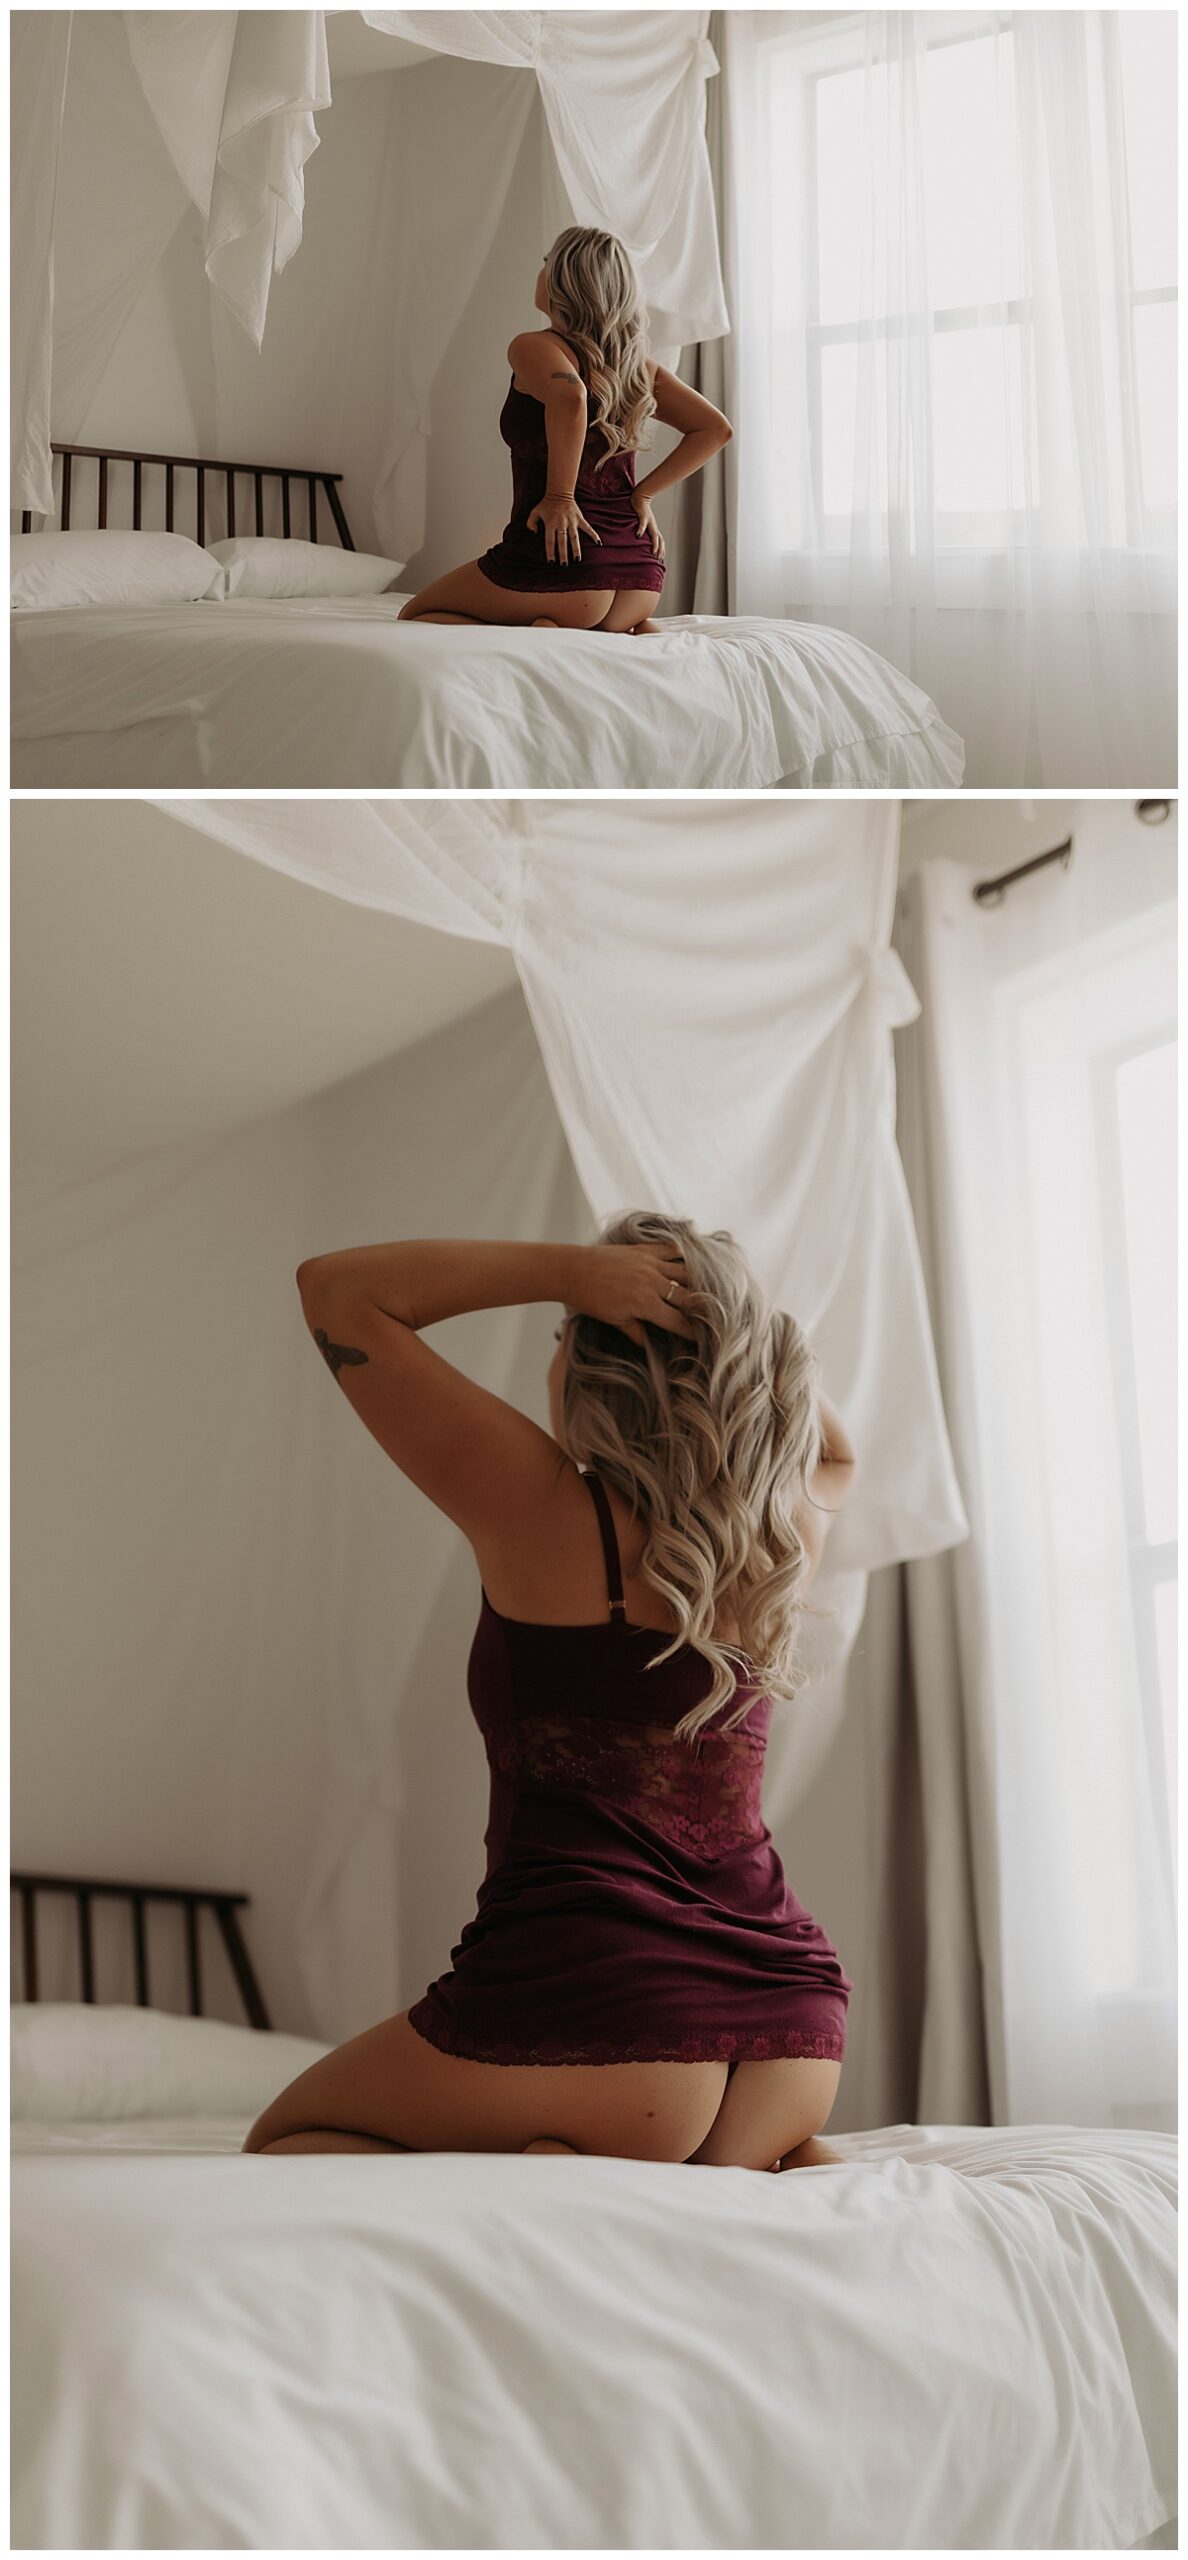 Adult wears Lingerie Slip Dress while running fingers through her hair and kneeling on the bed